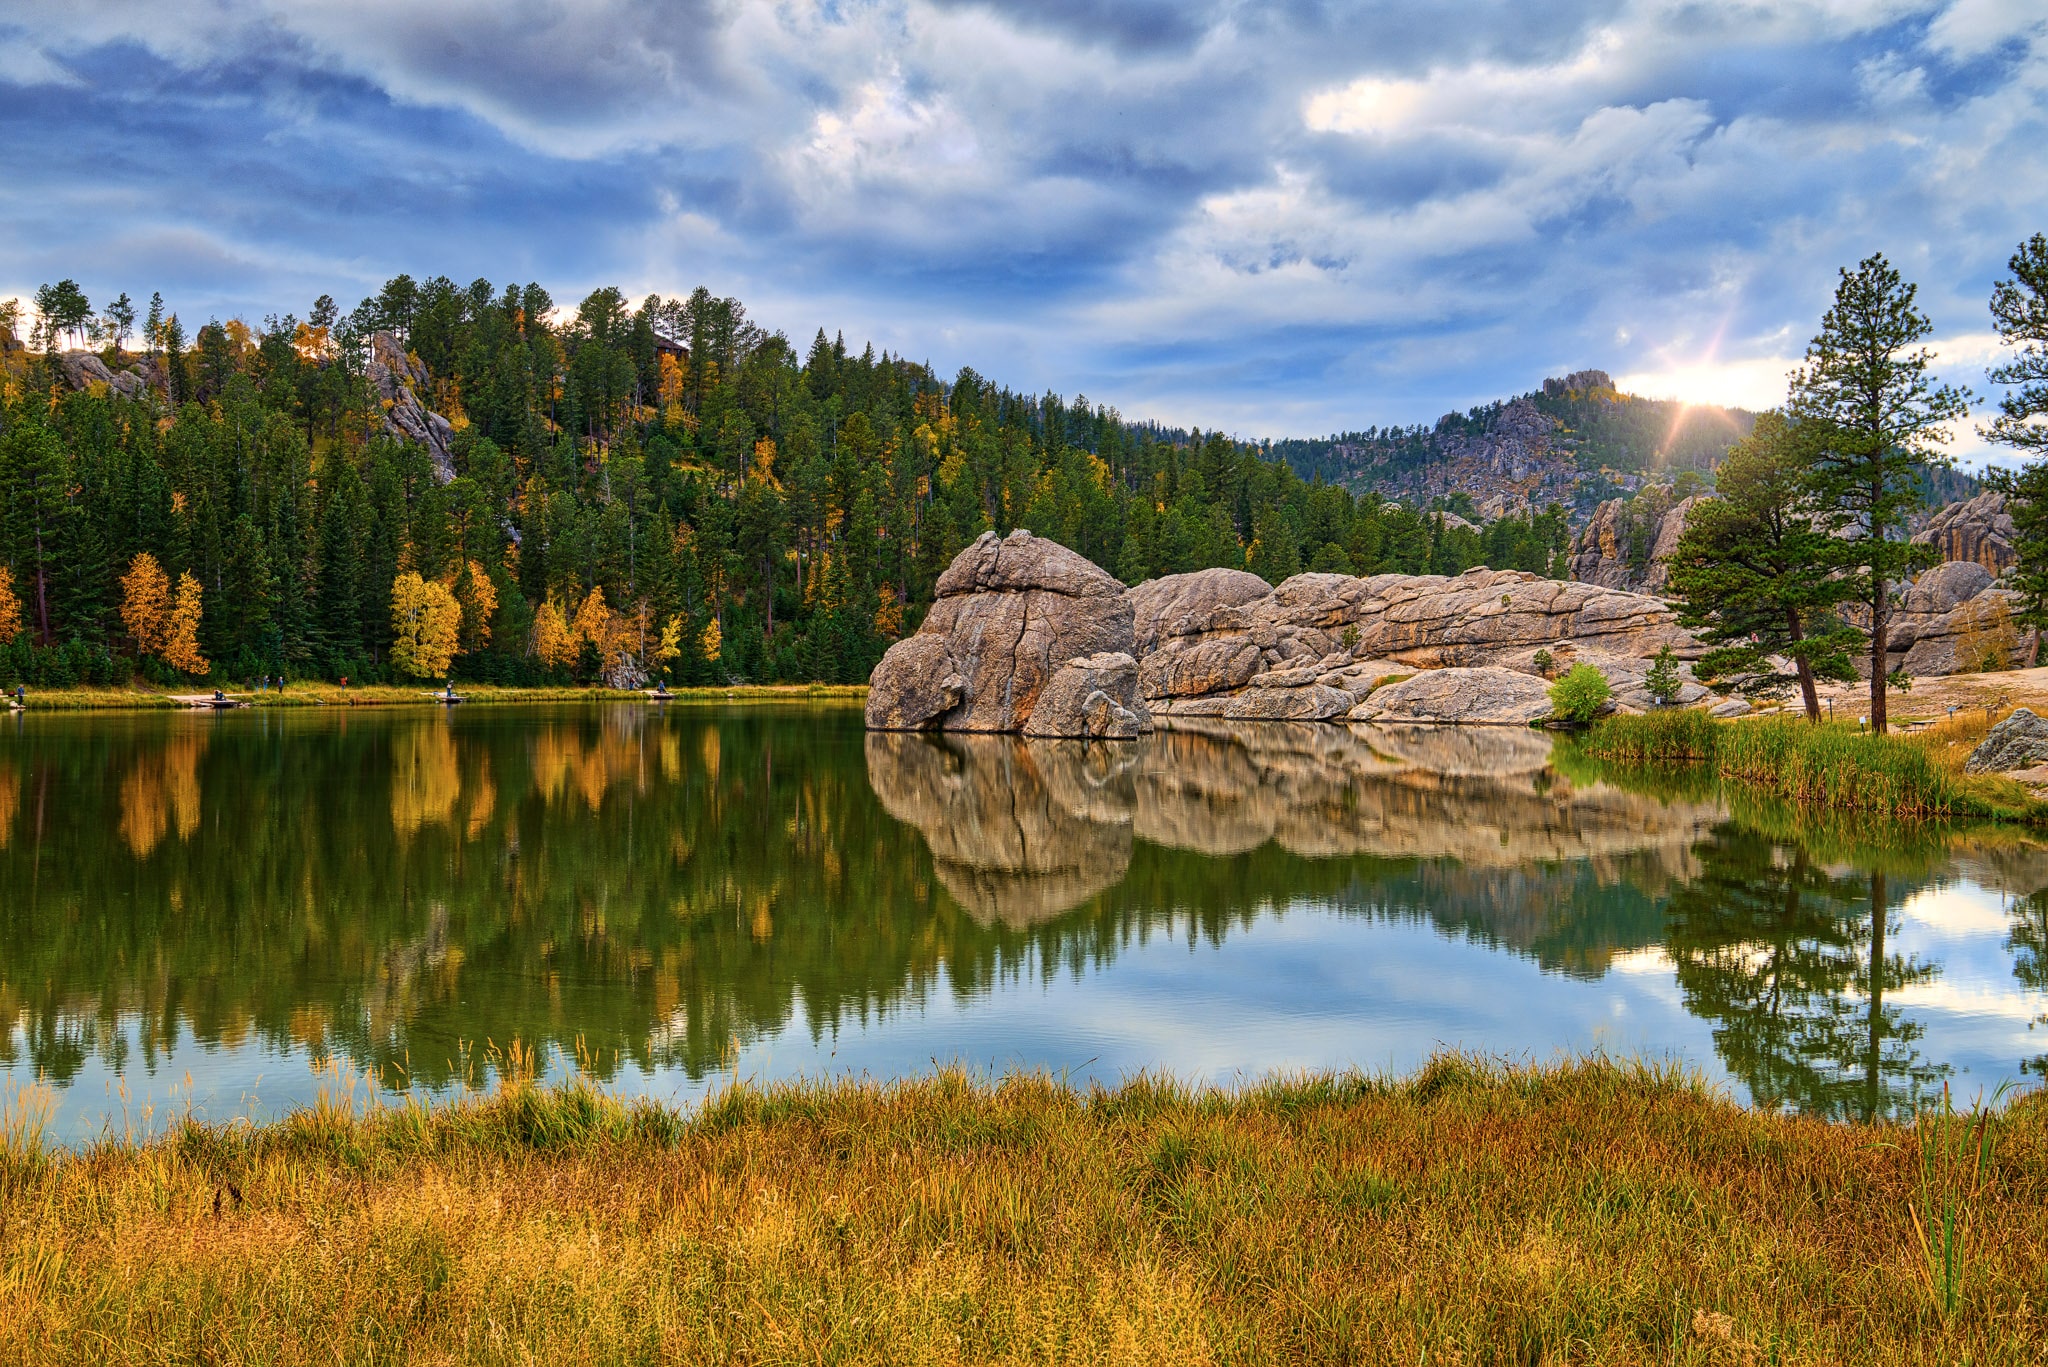 Clouds almost obscure the afternoon autumn sun as it highlights a granite rock formation and causes the multi-colored foliage to reflect in the still waters of Sylvan Lake in Custer State Park in South Dakota. Part of the Black Hills Landscapes article.